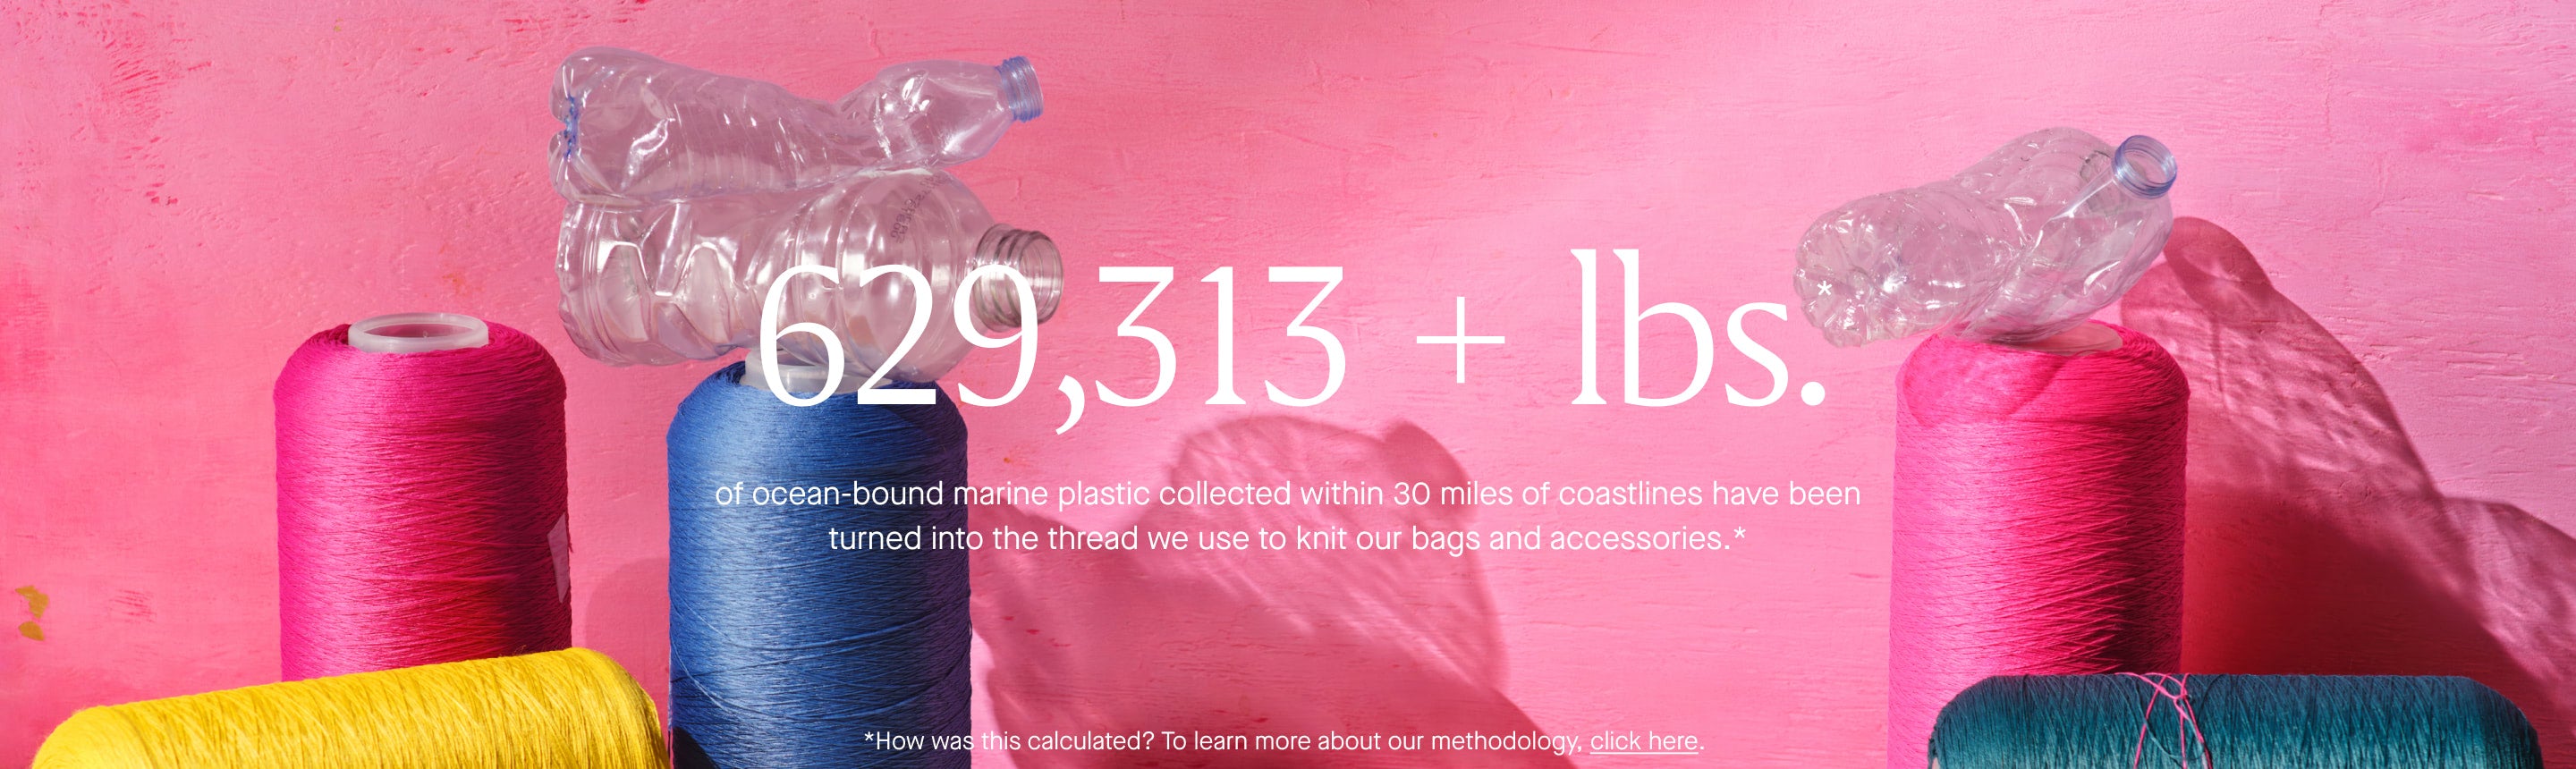 629,313+lbs of ocean-bound marine plastic collected within 30 miles of coastlines have been turned into the thread we use to knit our bags and accessories.*